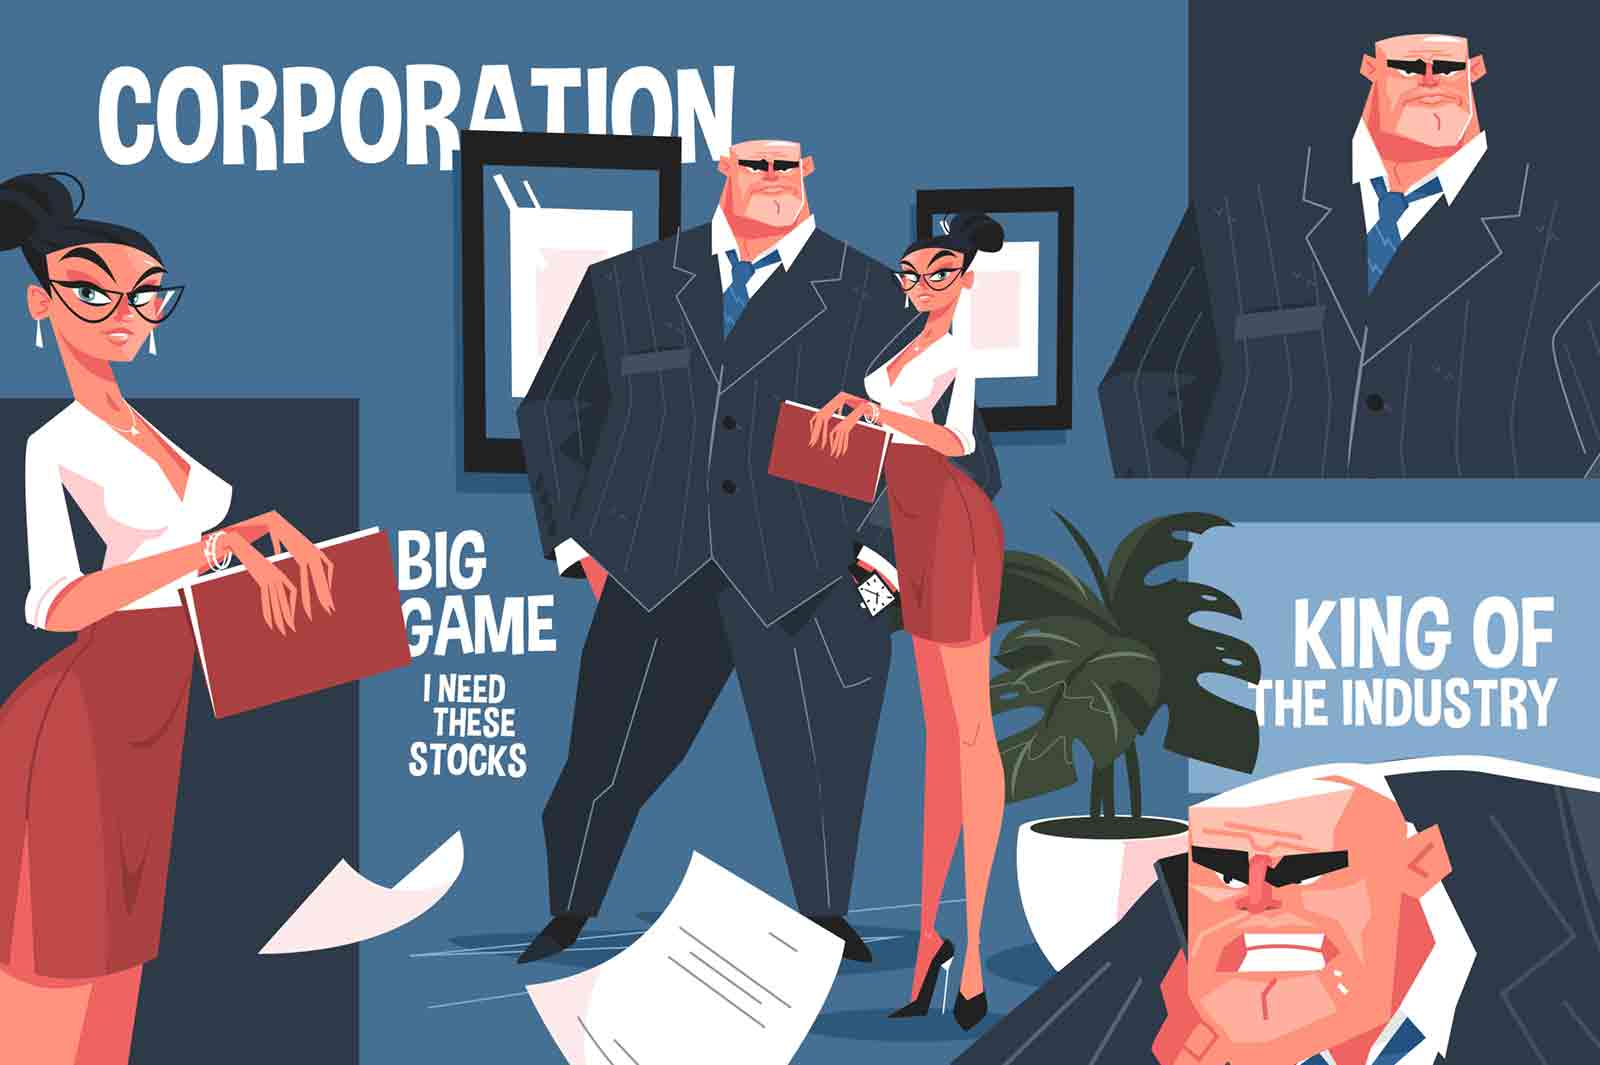 Big corporation boss vector illustration. King of industry. Chief with secretary. Strict and angry man at work in office flat style design. Big game I need this stocks inscription